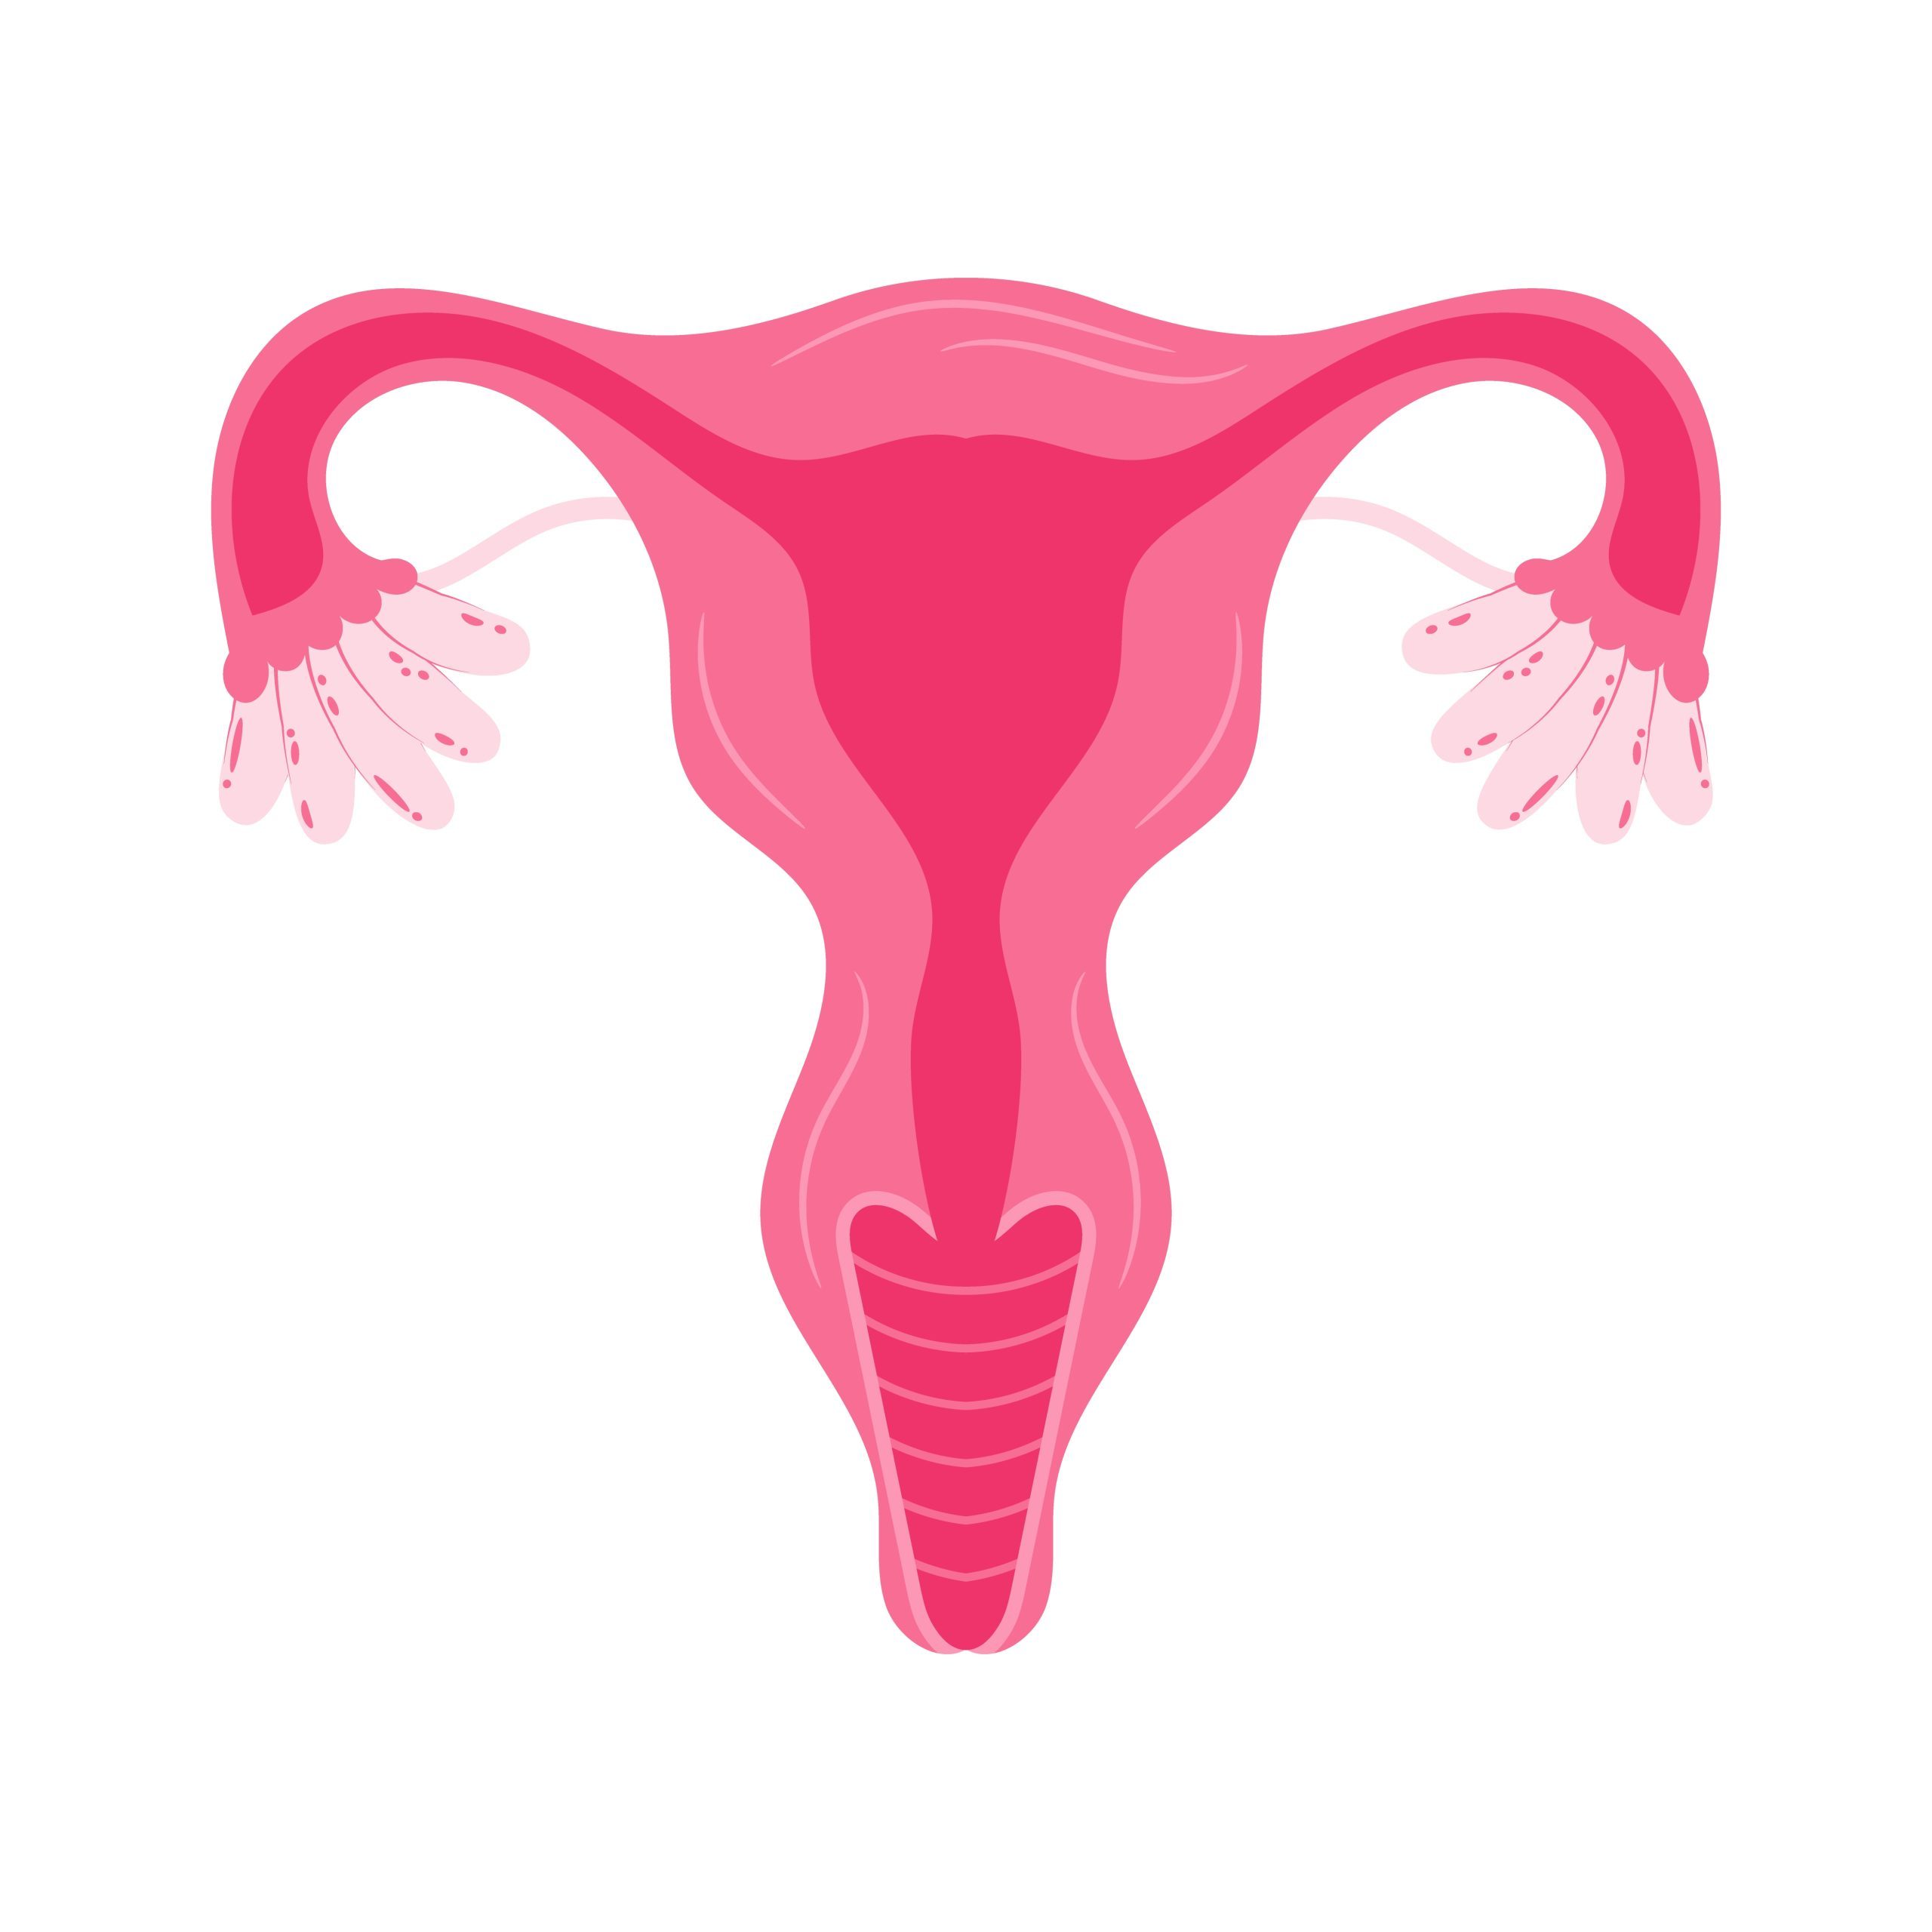 Women health Uterus Floral Ovary reproductive system Concept